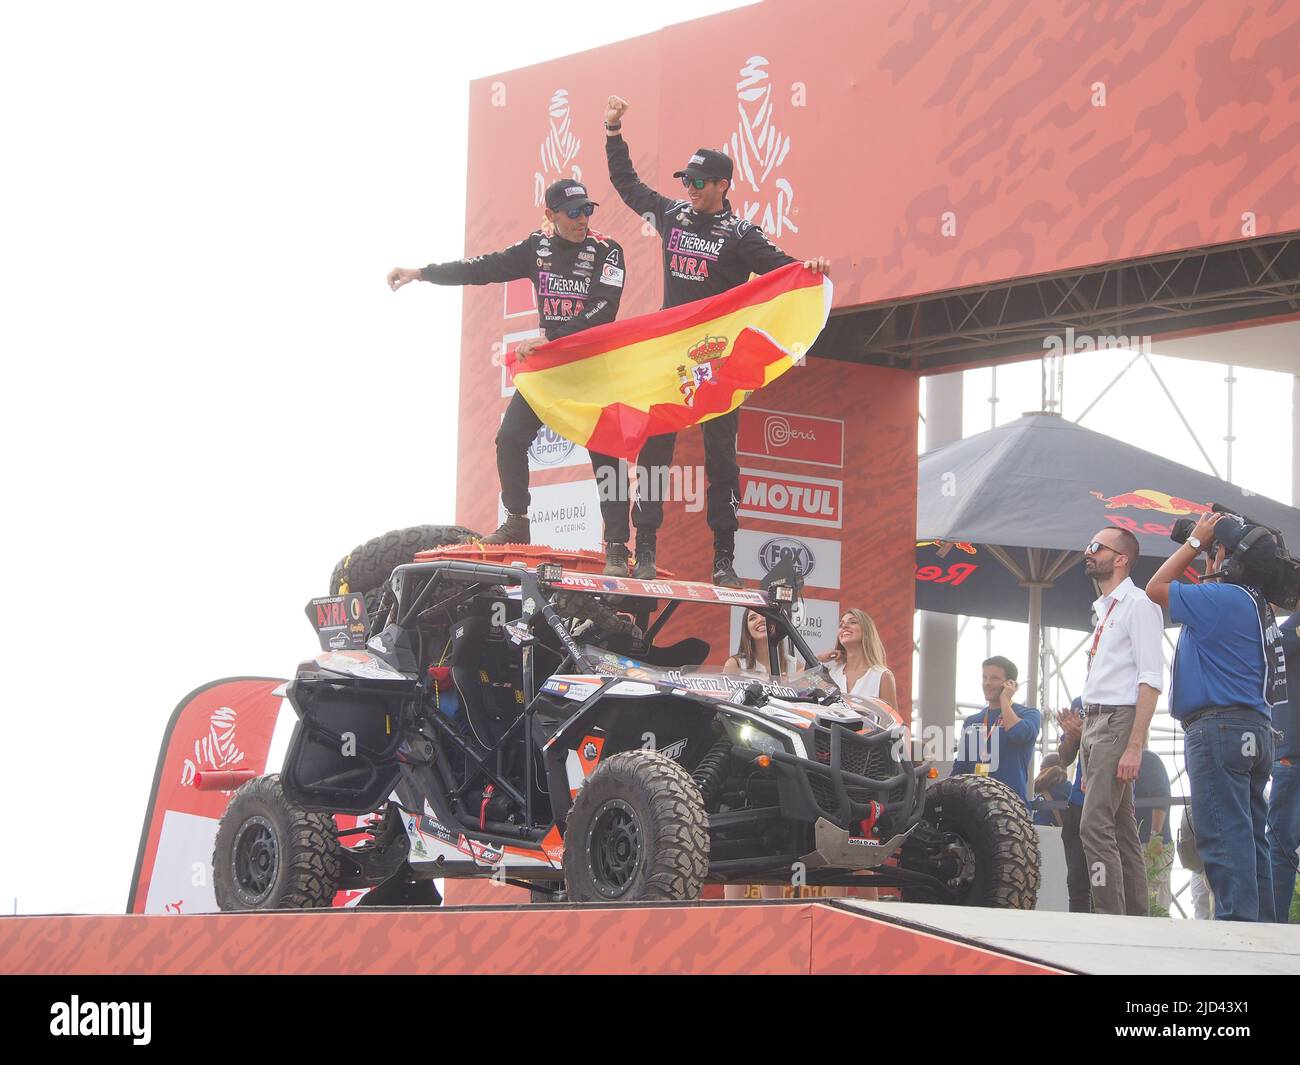 Can Am 436, Jose Luis Alvarez and Joel Alvarez, from Spain, Herranz Ayra Racing Team, on the podium during the starting of the 2019 Dakar Rally, ahead of the rally's Stage 1, Lima-Pisco. The Dakar rally runs this year 100% in Peru. Stock Photo